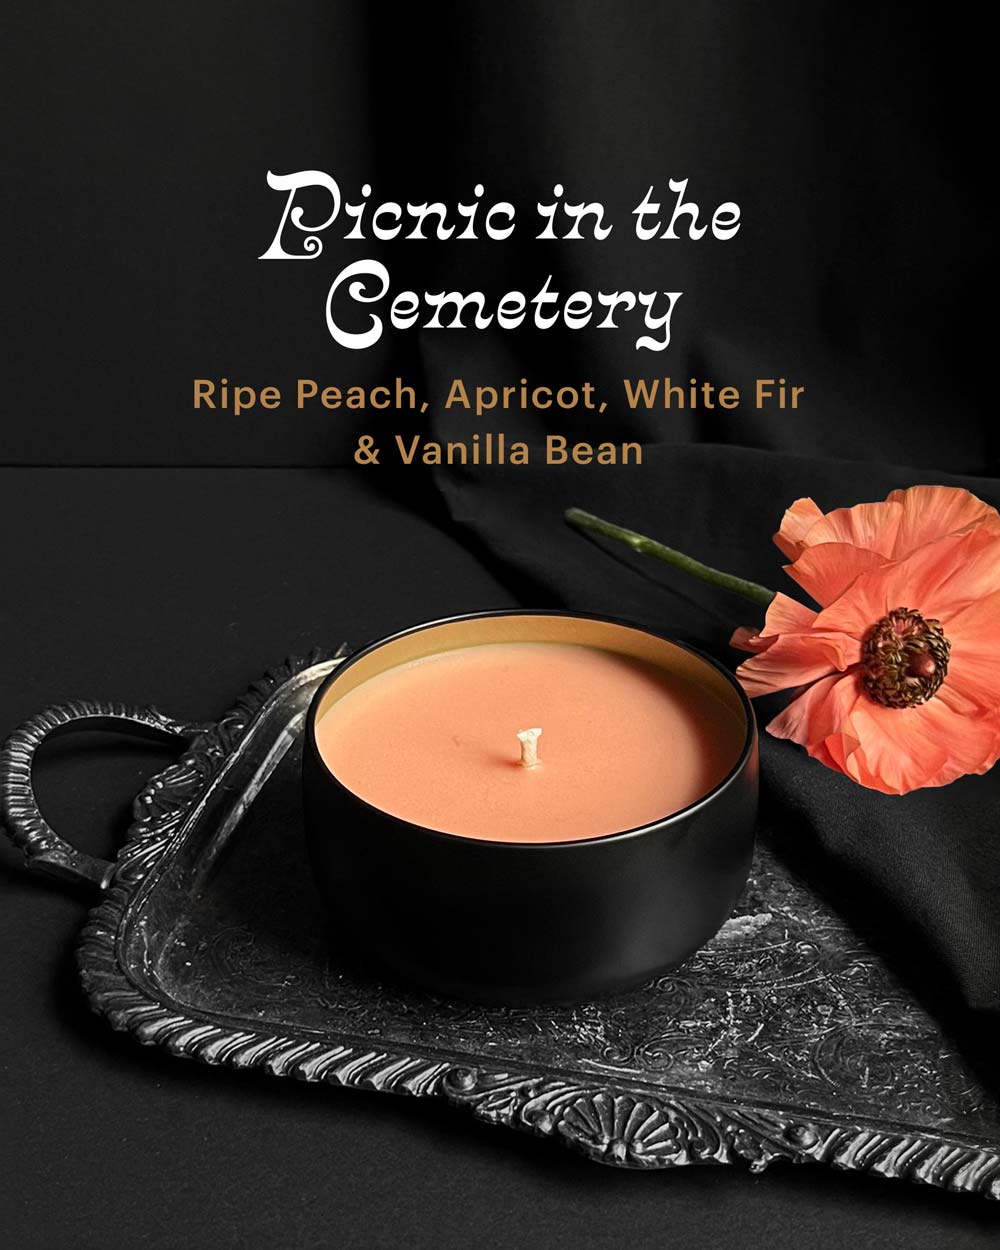 Picnic in the Cemetery ~40hr Candle (Peach & White Fir) by Graveyard Wanders - Nocturne LLC